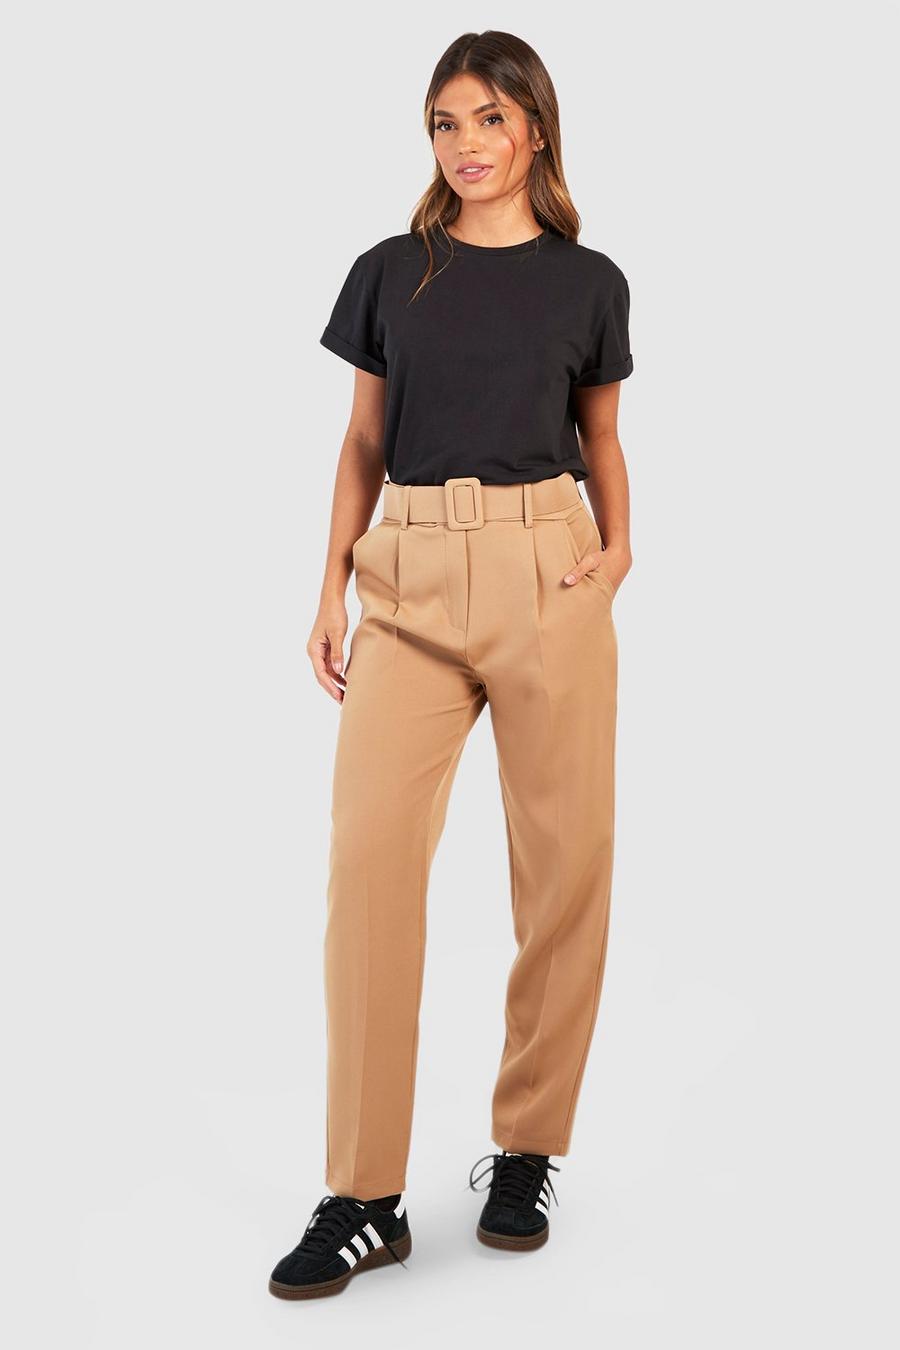 Camel Self Fabric Belted Slim Fit paul Trousers